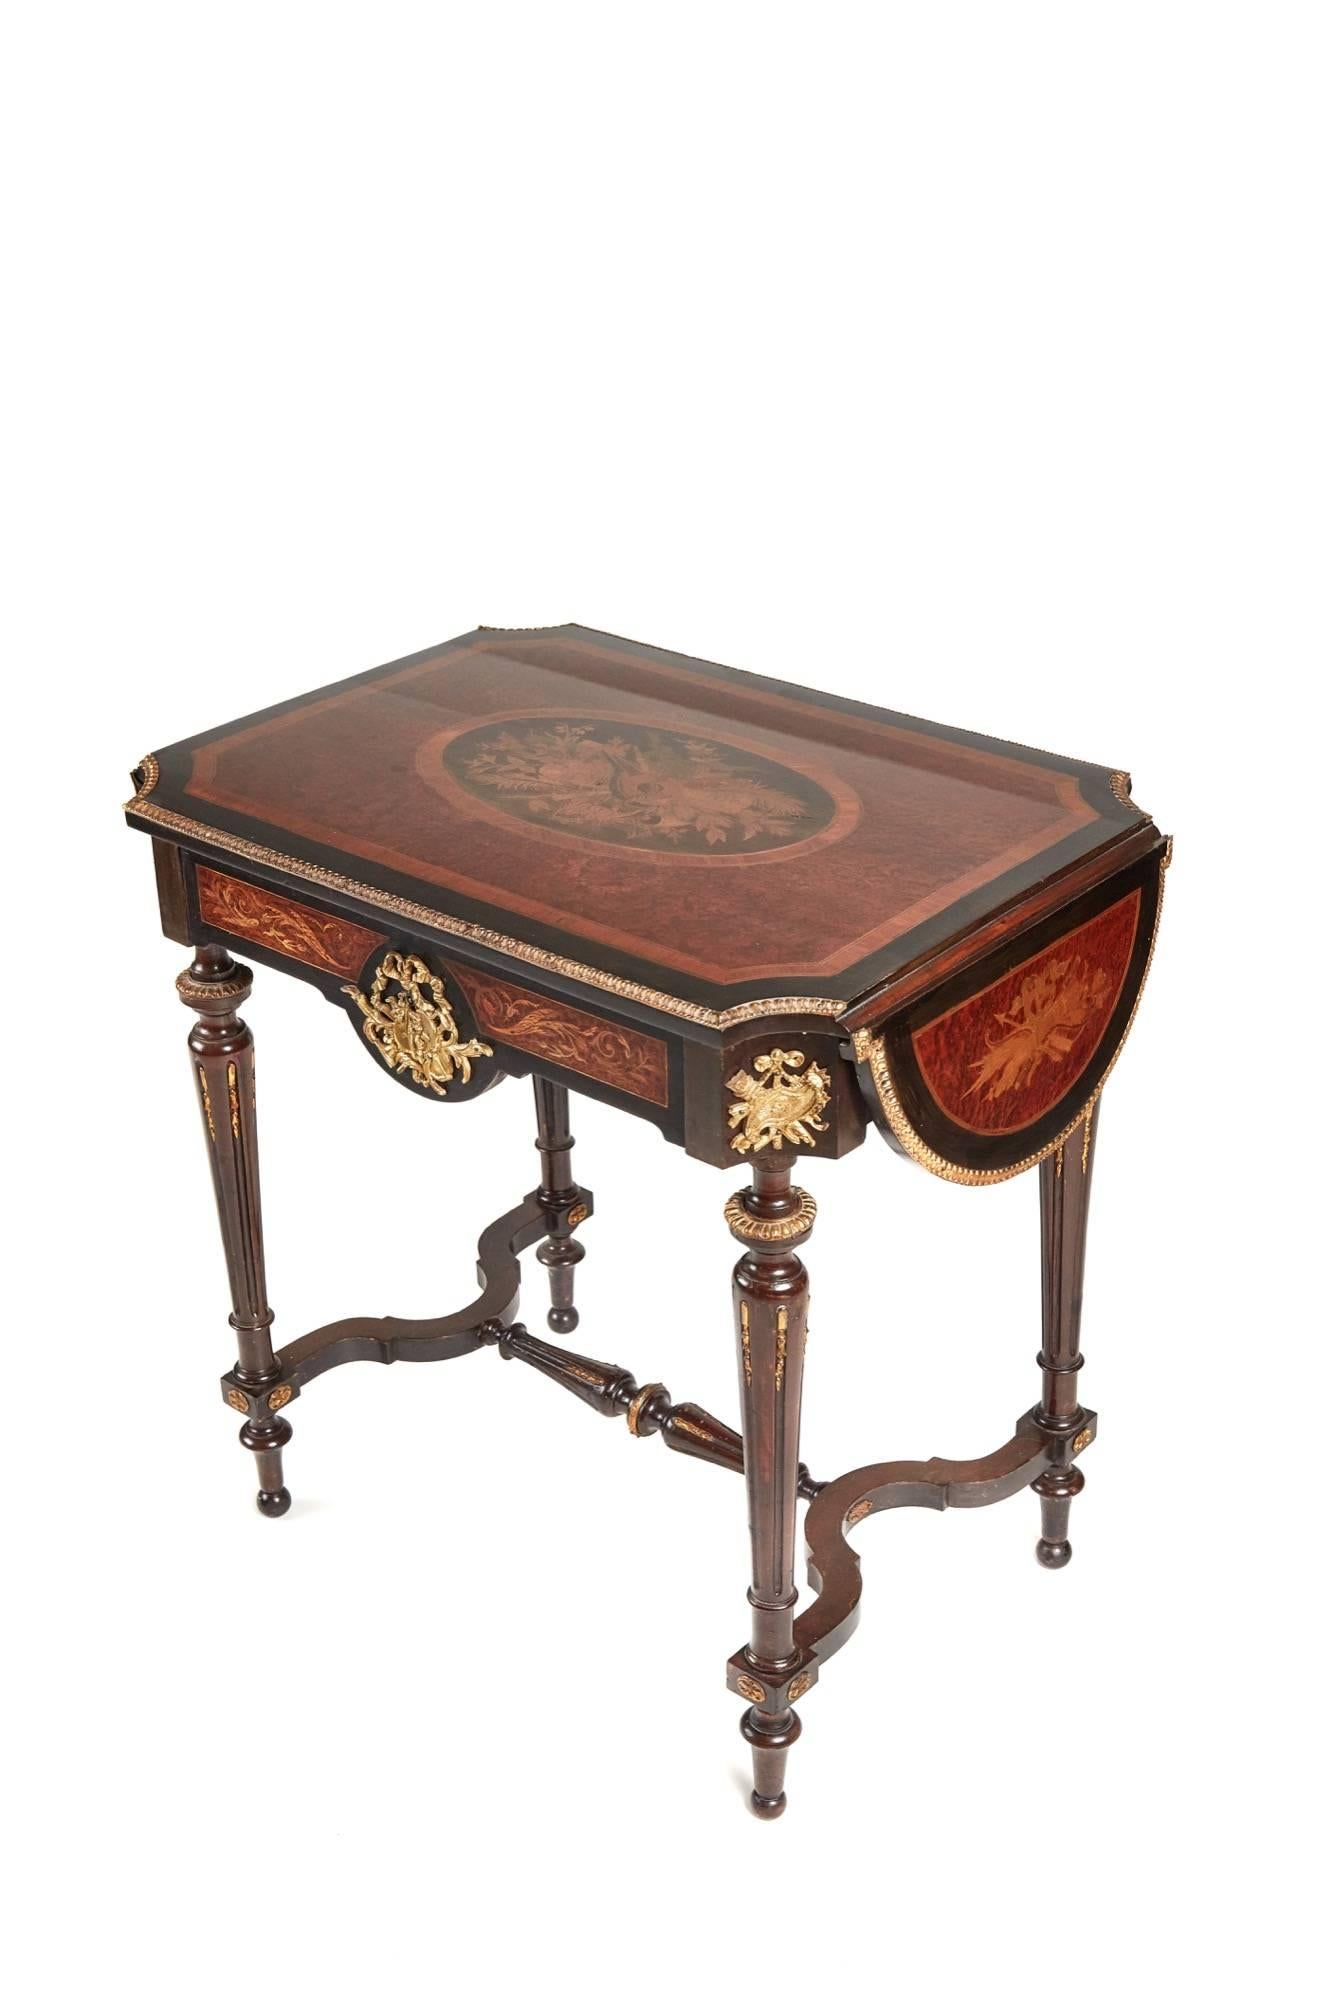 Fine French marquetry drop leaf centre table, with a fine amboyna veneered top and fine marquetry satinwood, walnut, boxwood, kingwood and black lacquer inlay framed within a kingwood and black lacquer banding, the two shaped drop leafs with good